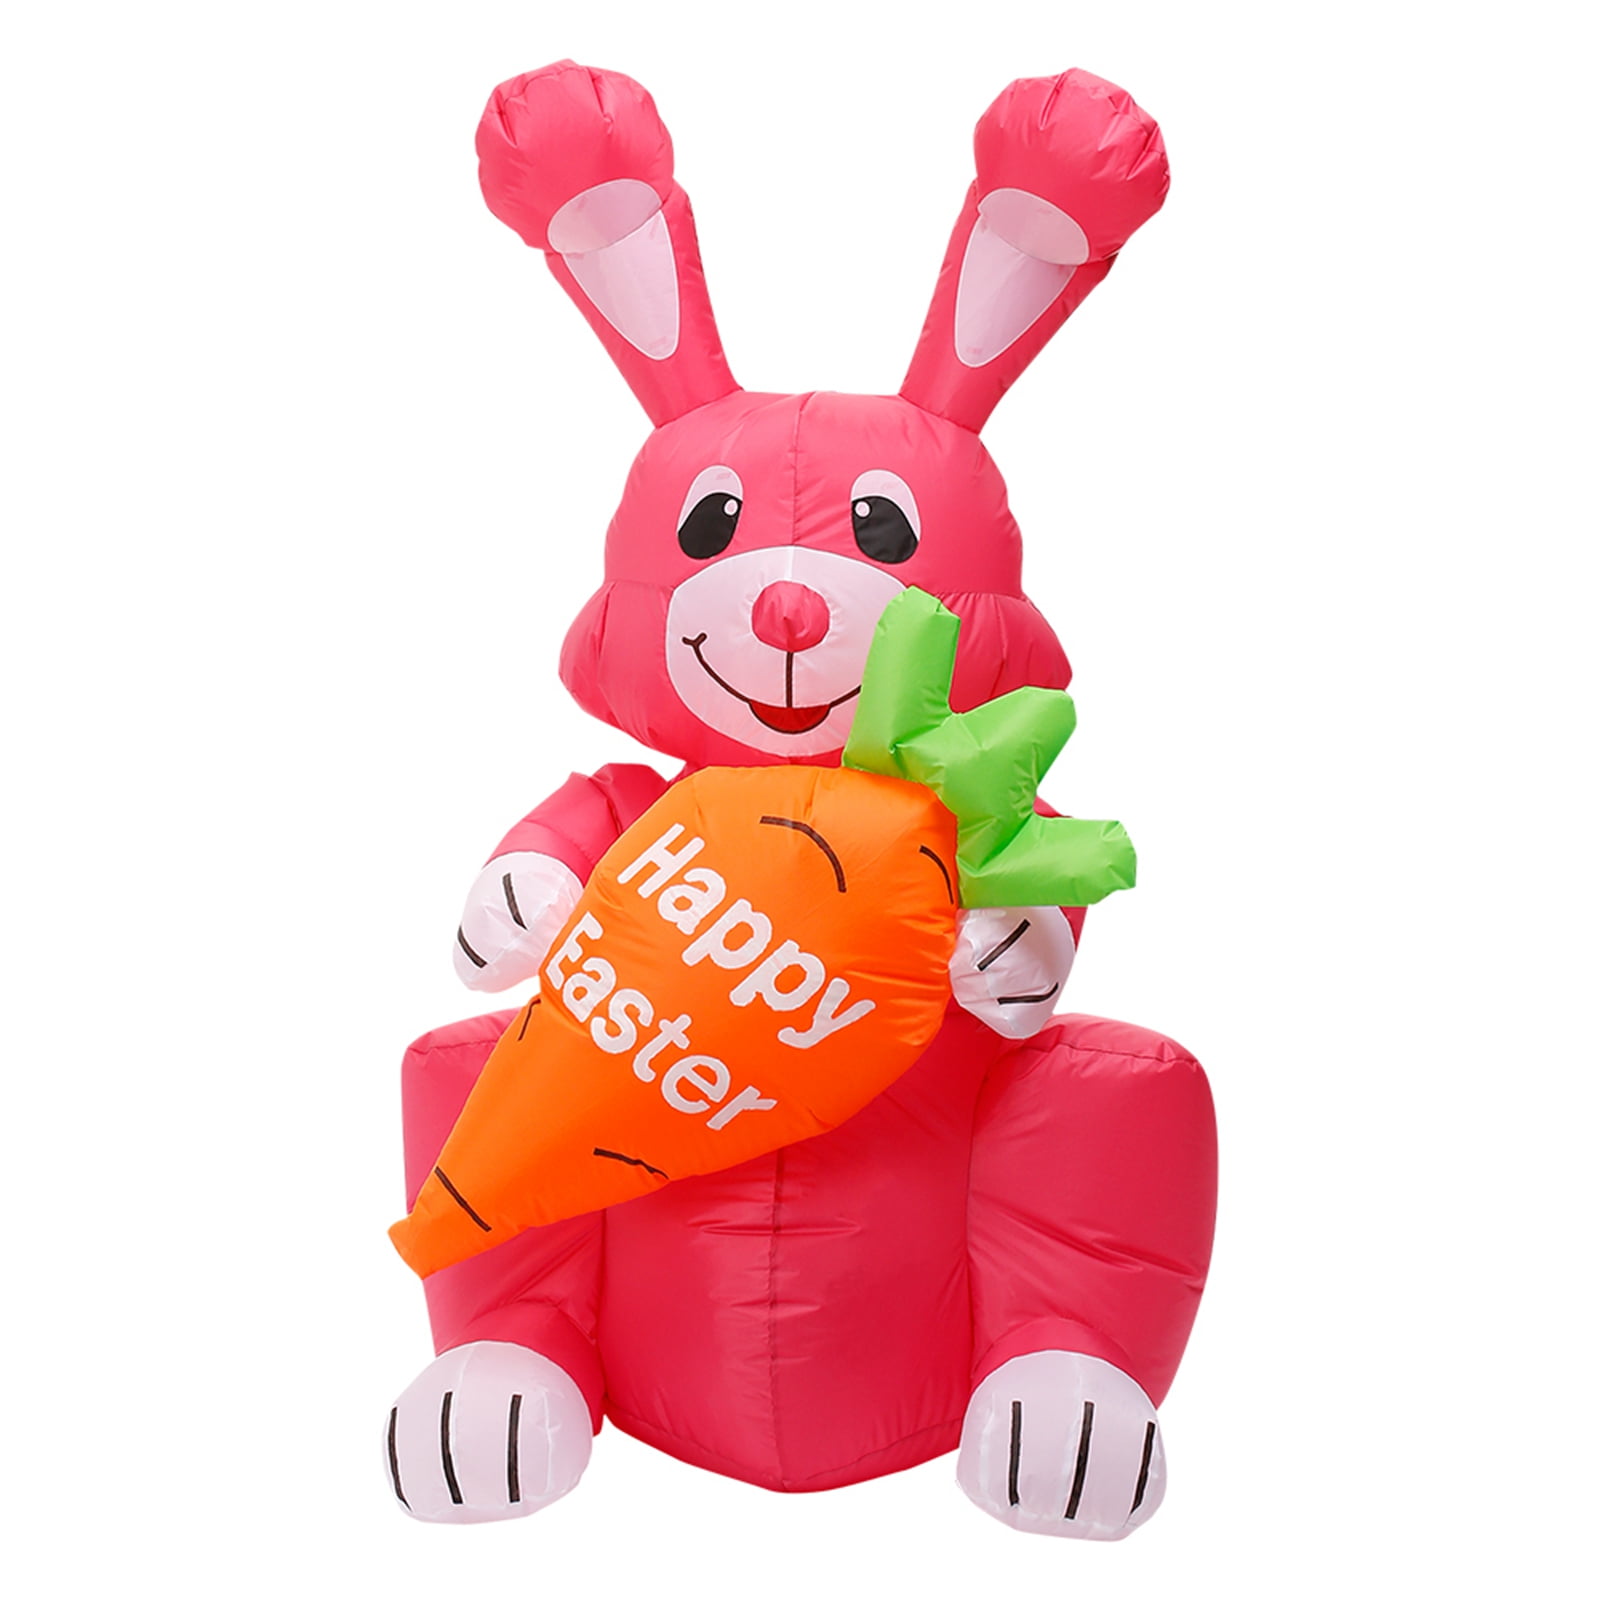 BLOW UP INFLATABLE TOYS Fancy Party Accessory Prop Up Decoration-Rabbit 